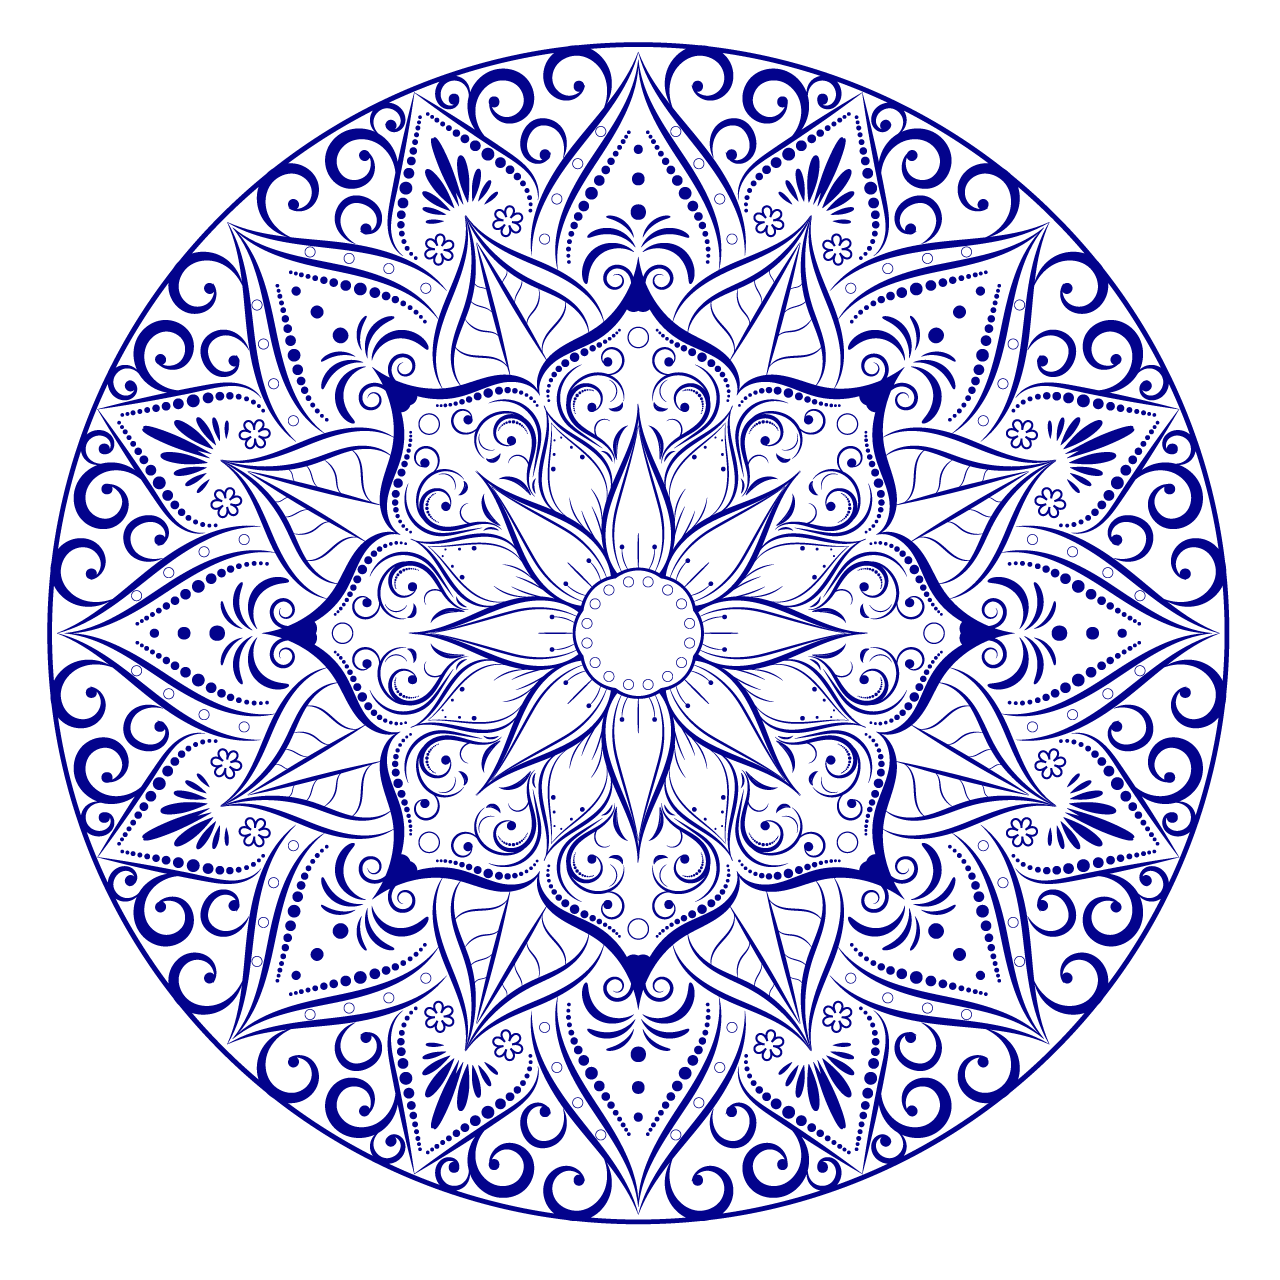 Circle pattern petal flower mandala with black whitefloral relaxation patterns unique design drawn pattern meditation relax